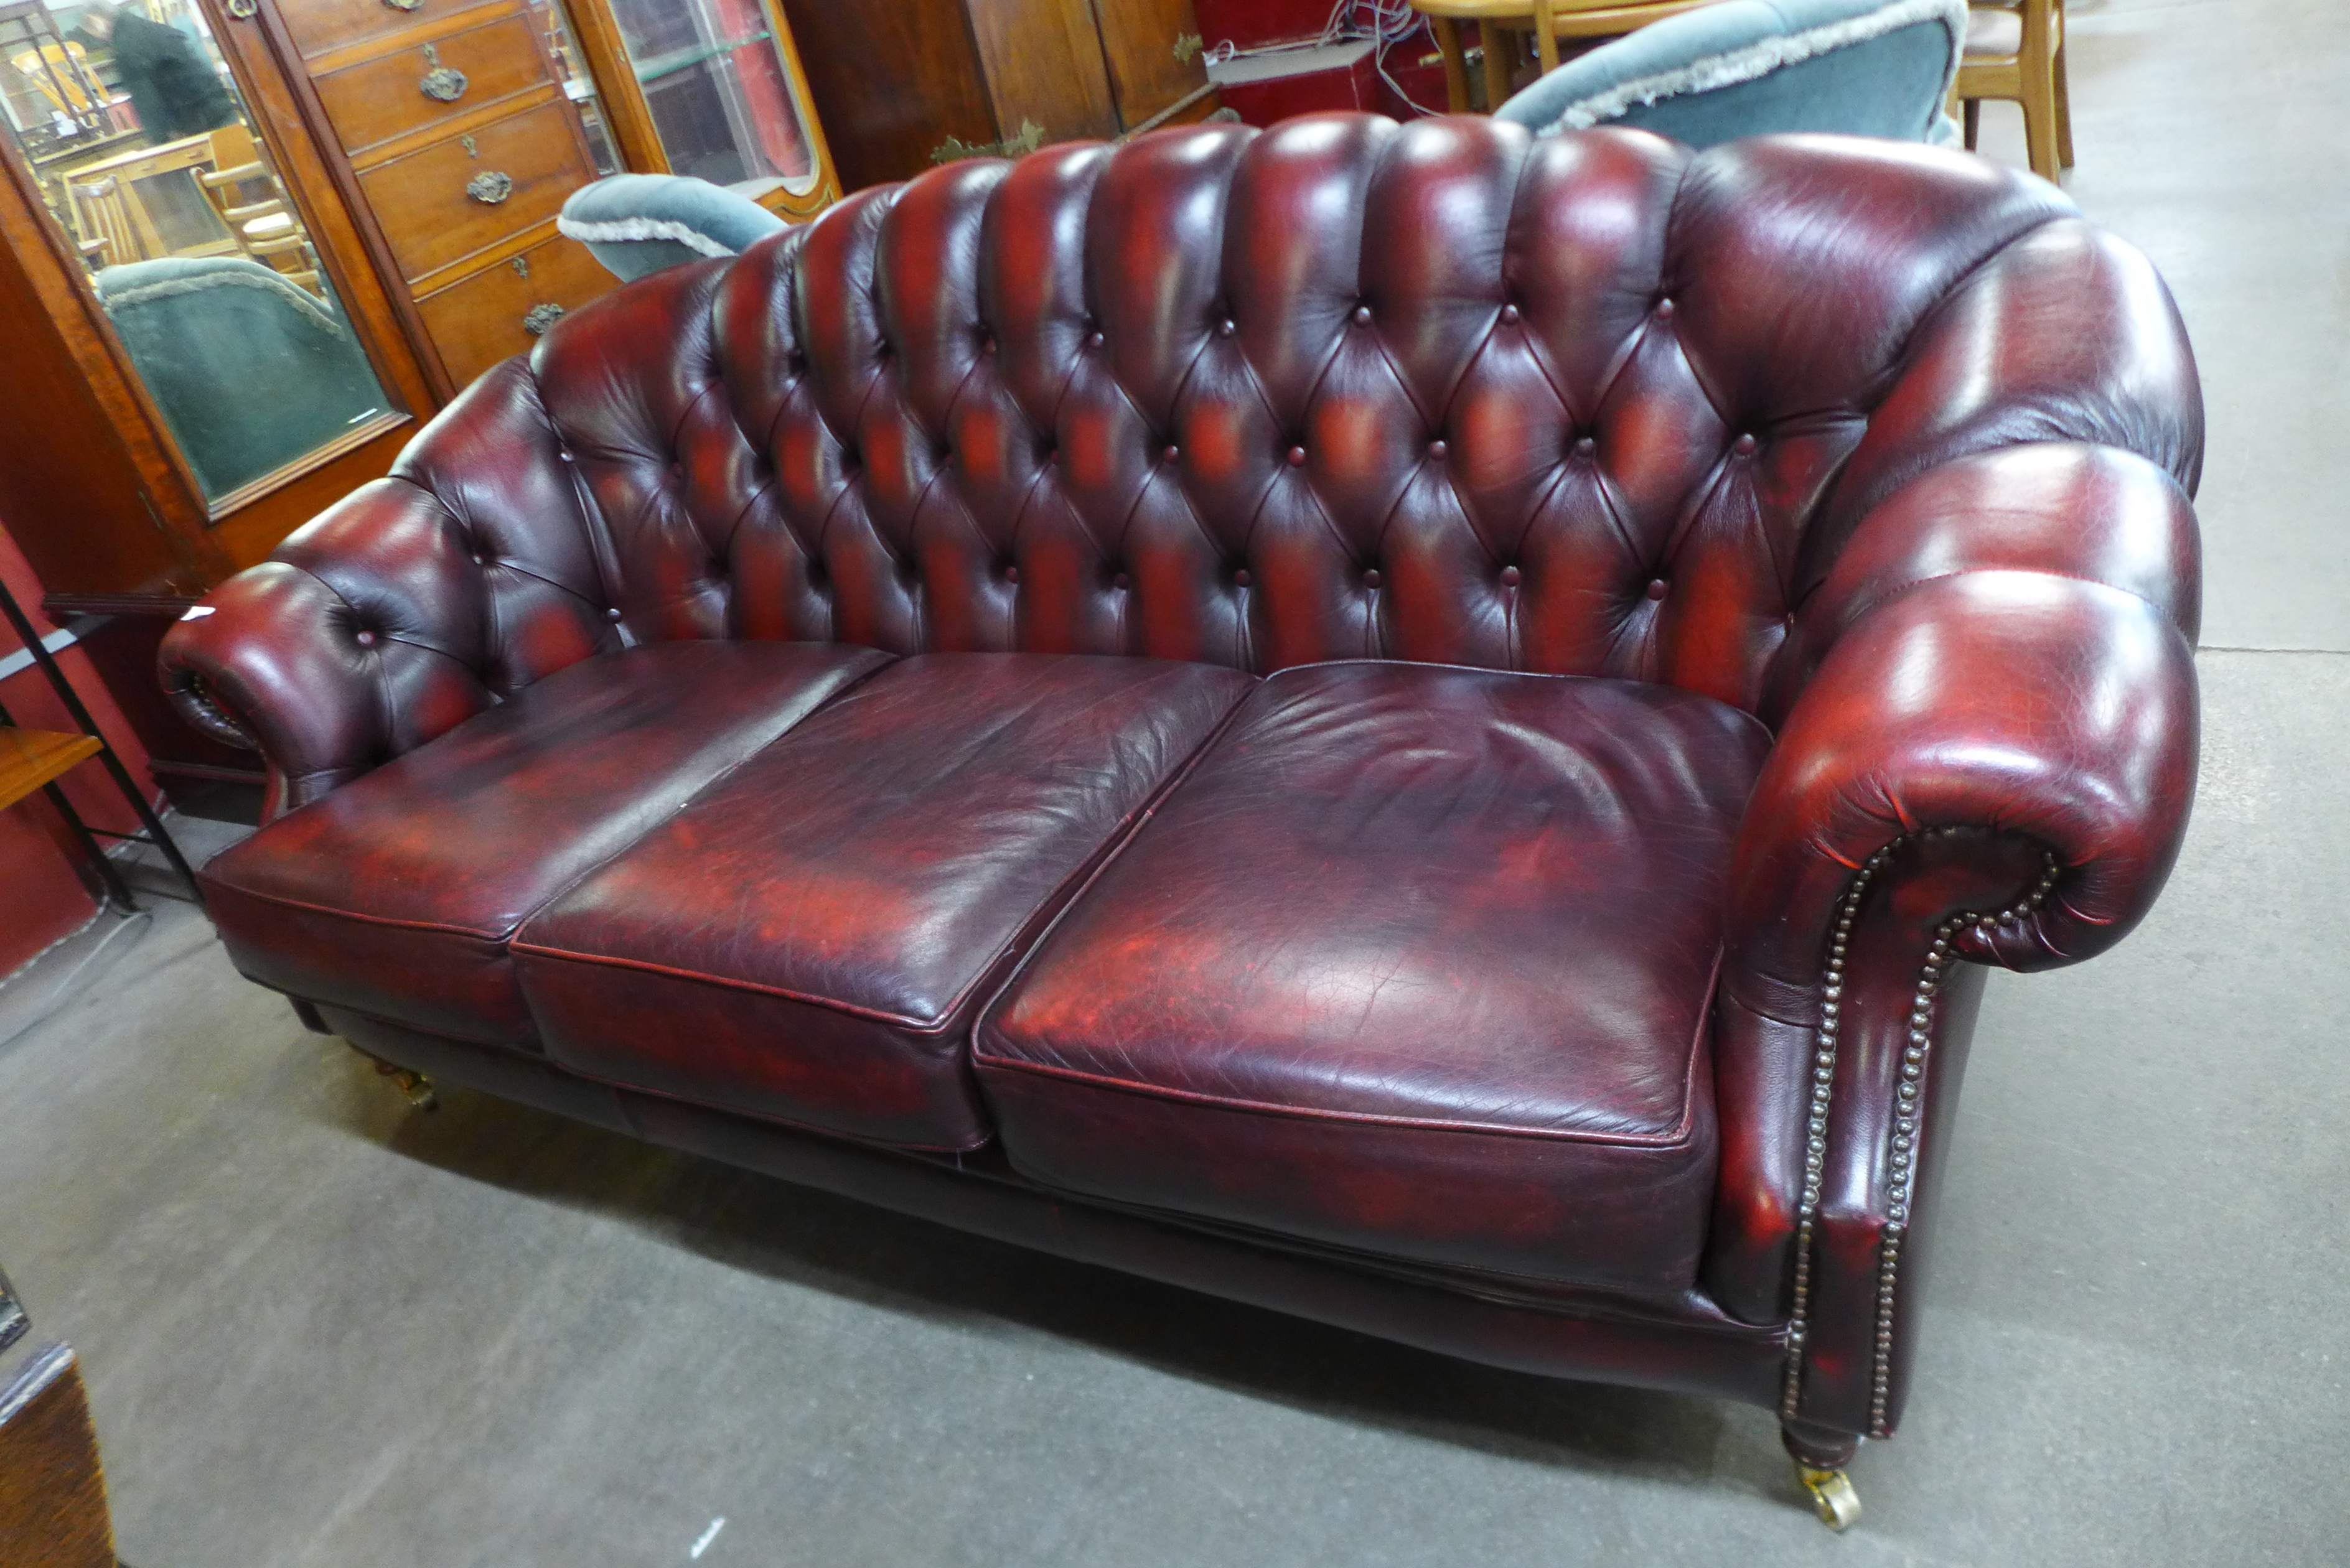 A red leather Chesterfield style settee